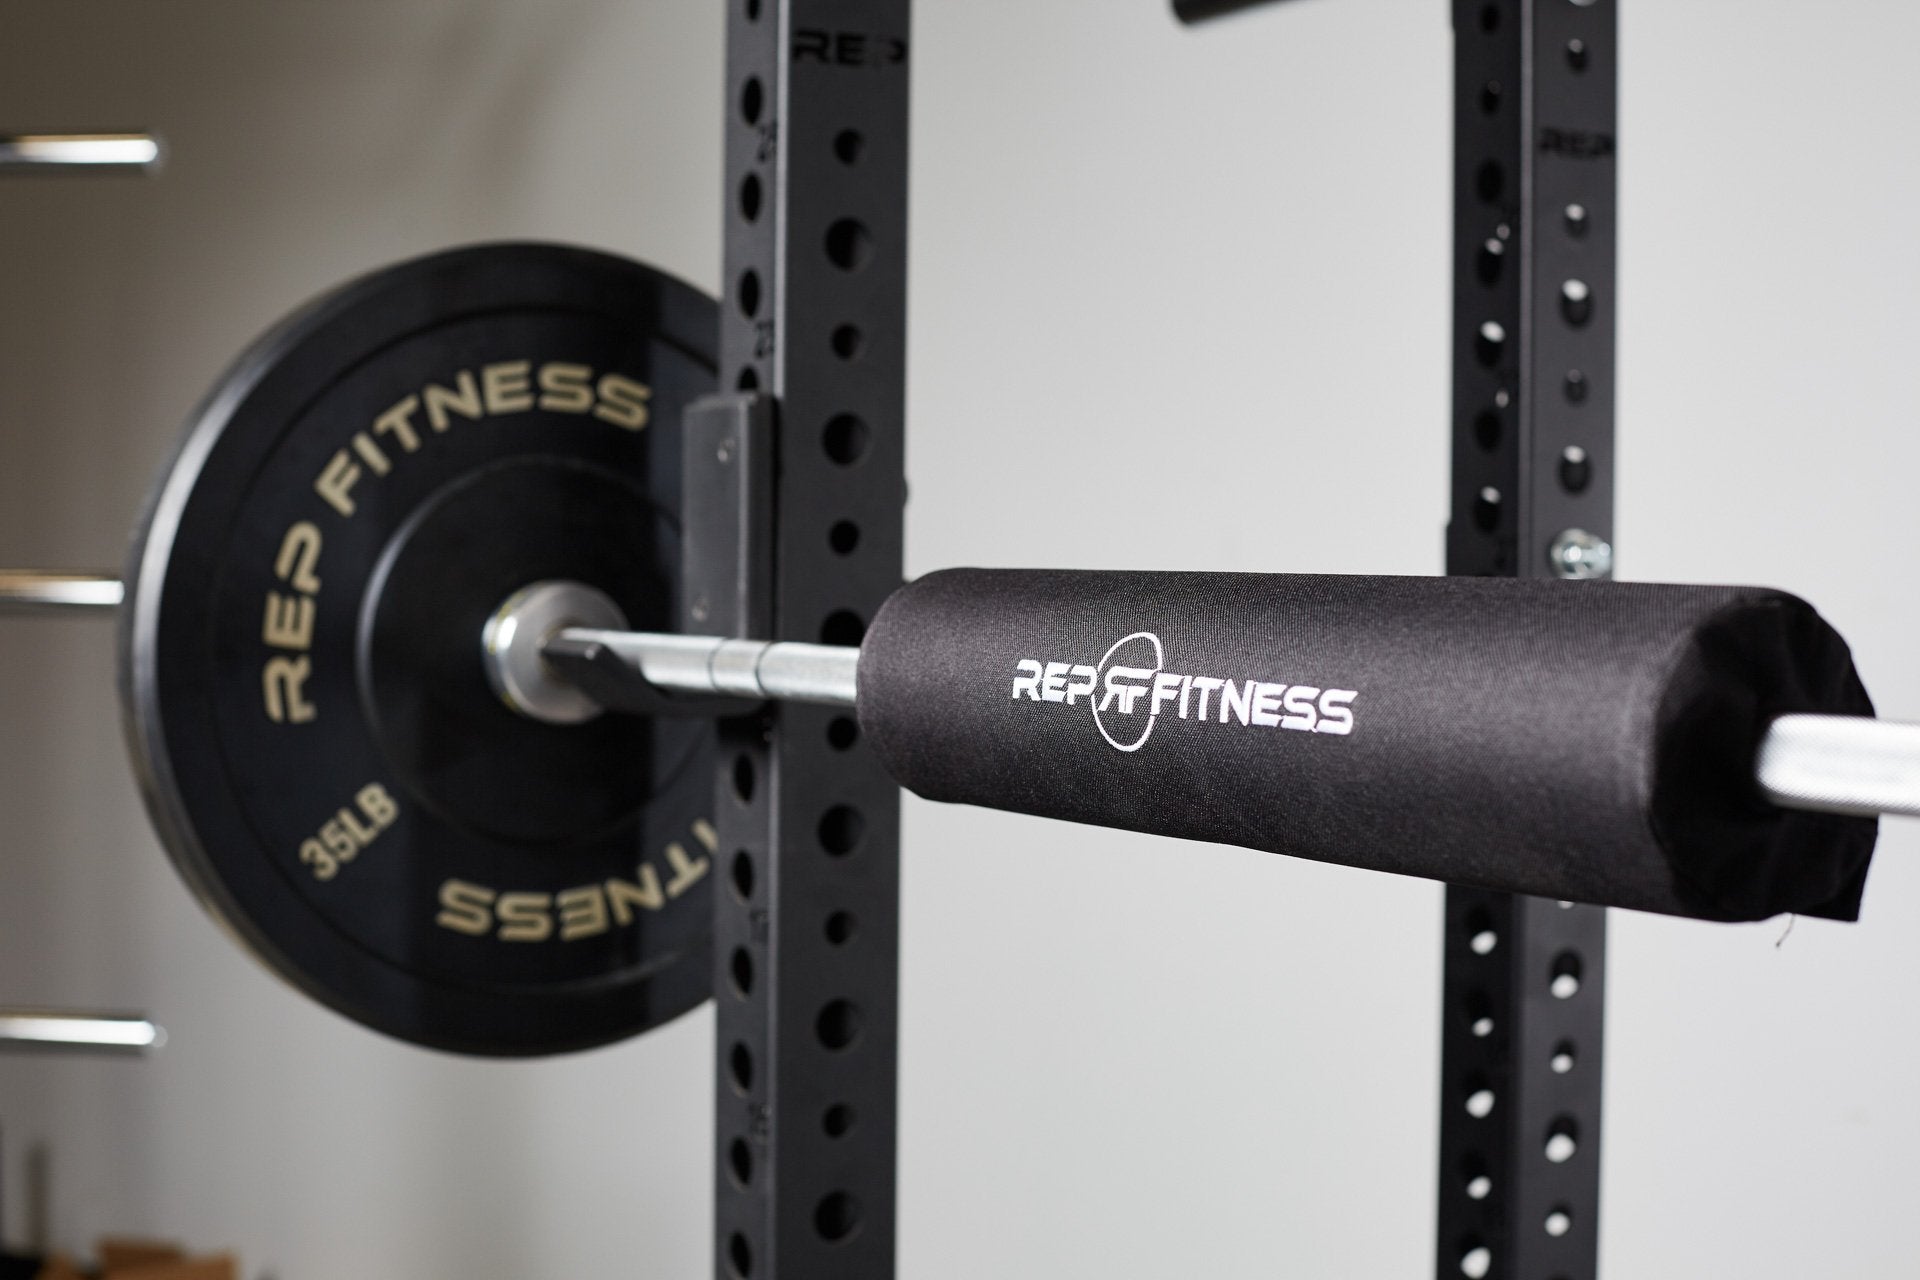 A REP barbell shoulder pad secured onto a racked barbell loaded with REP bumper plates.